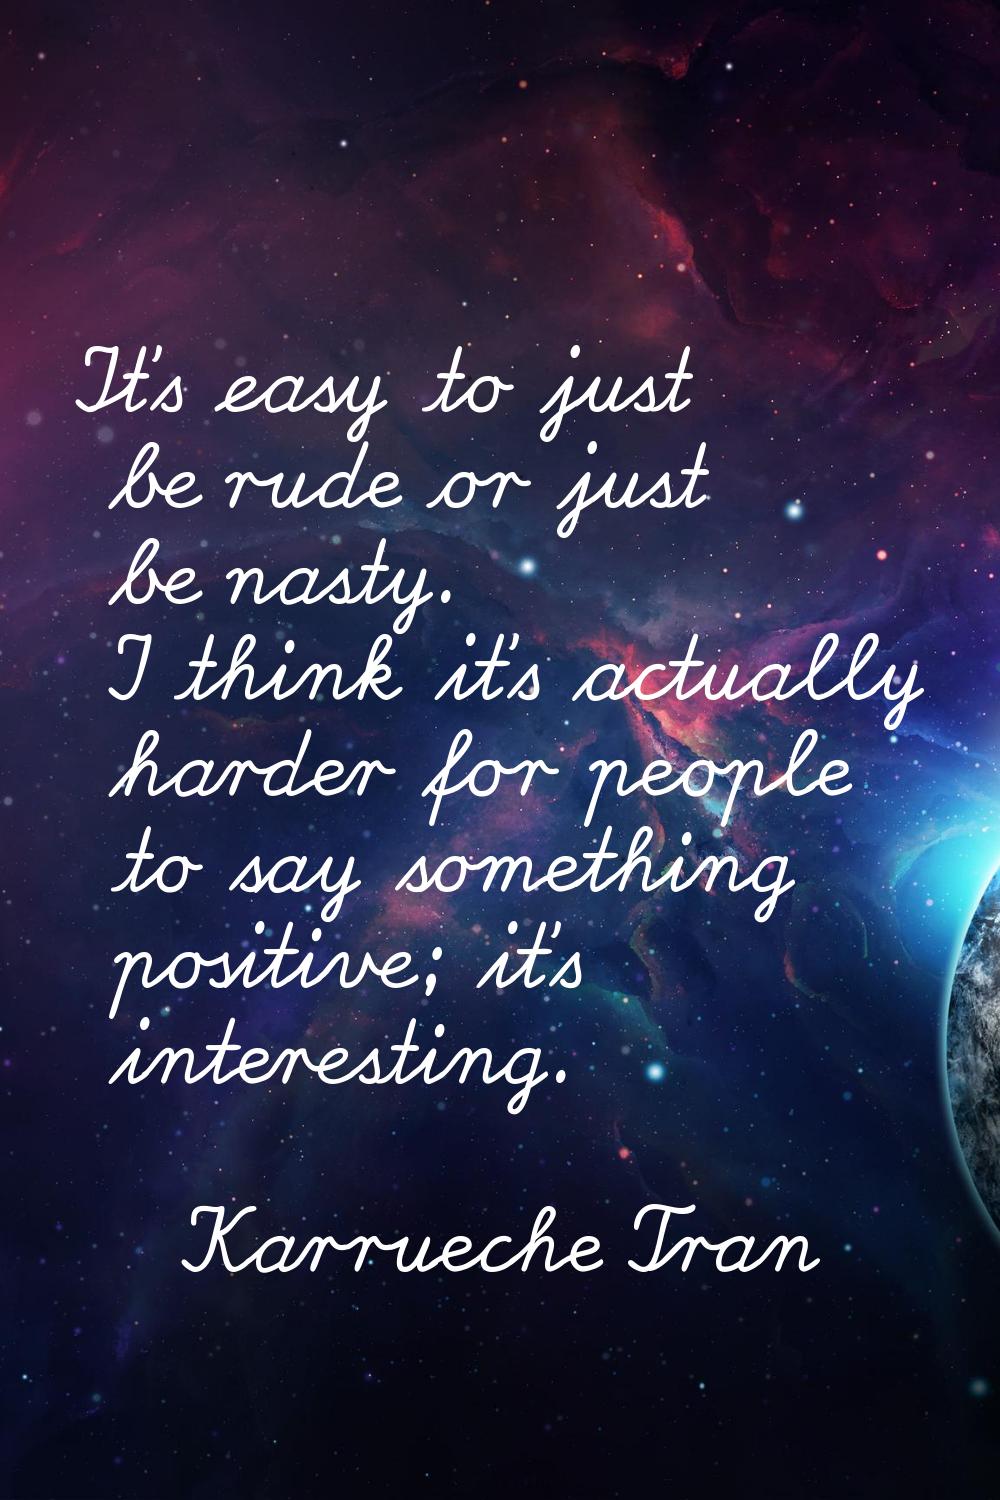 It's easy to just be rude or just be nasty. I think it's actually harder for people to say somethin